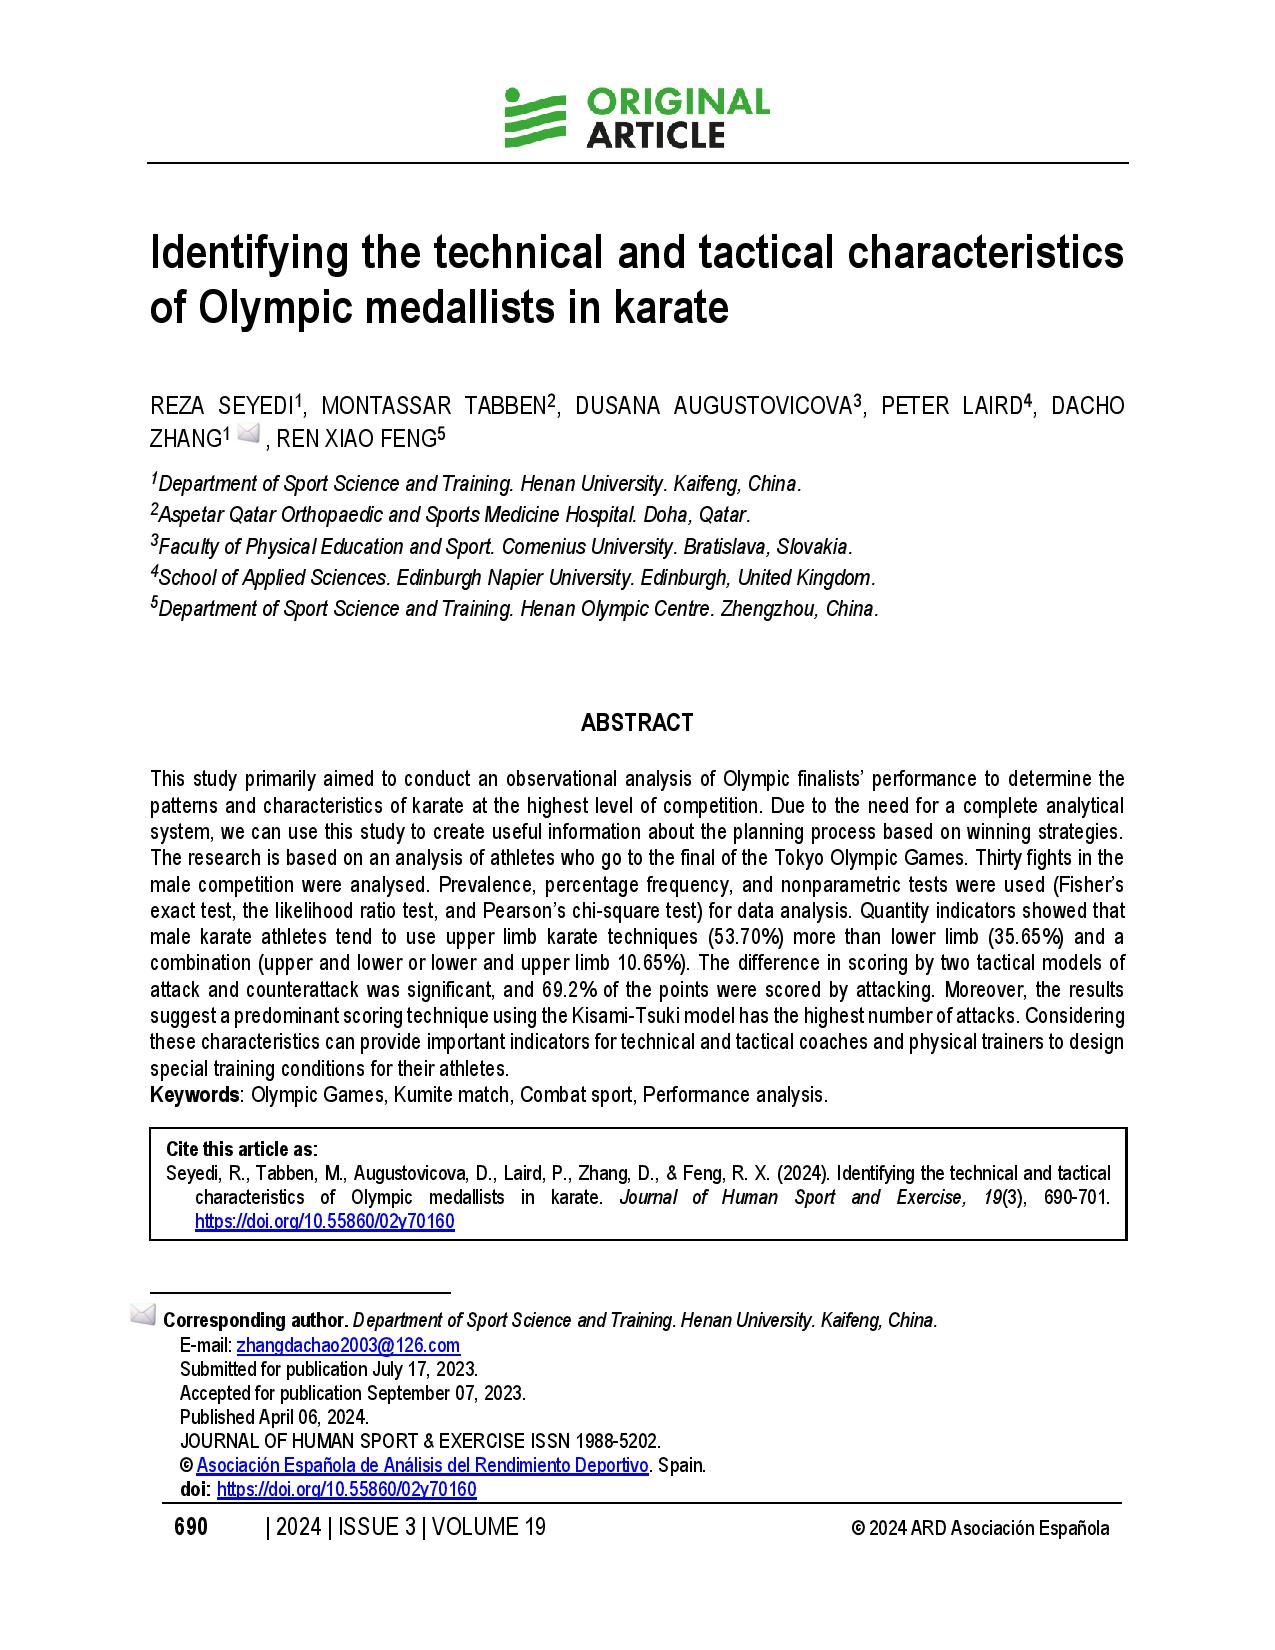 Identifying the technical and tactical characteristics of Olympic medallists in karate